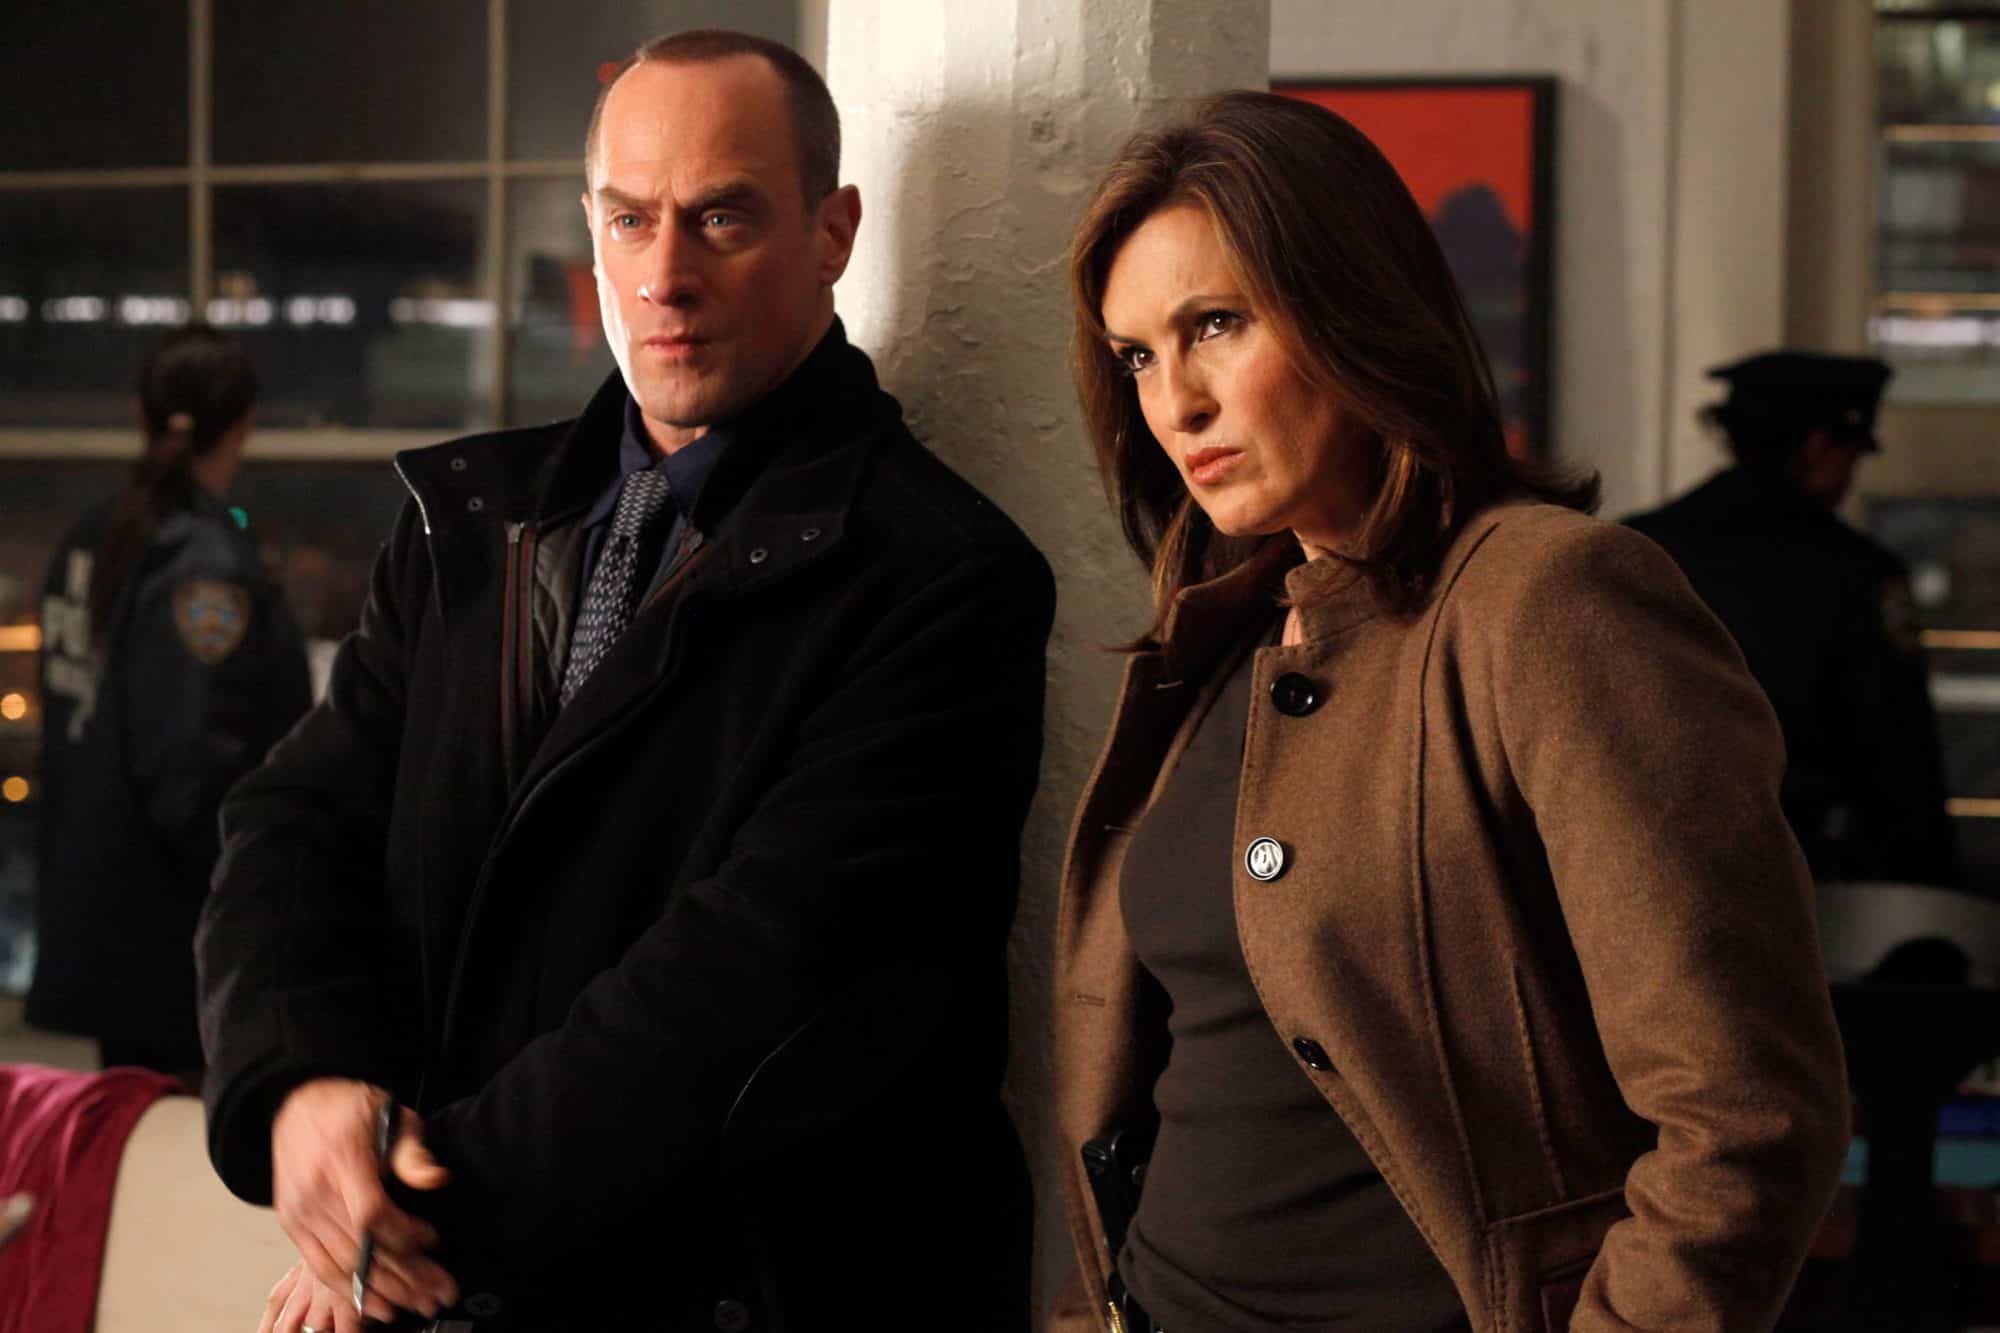 Law and Order Season 22 Episode 16 Release Date & Spoilers